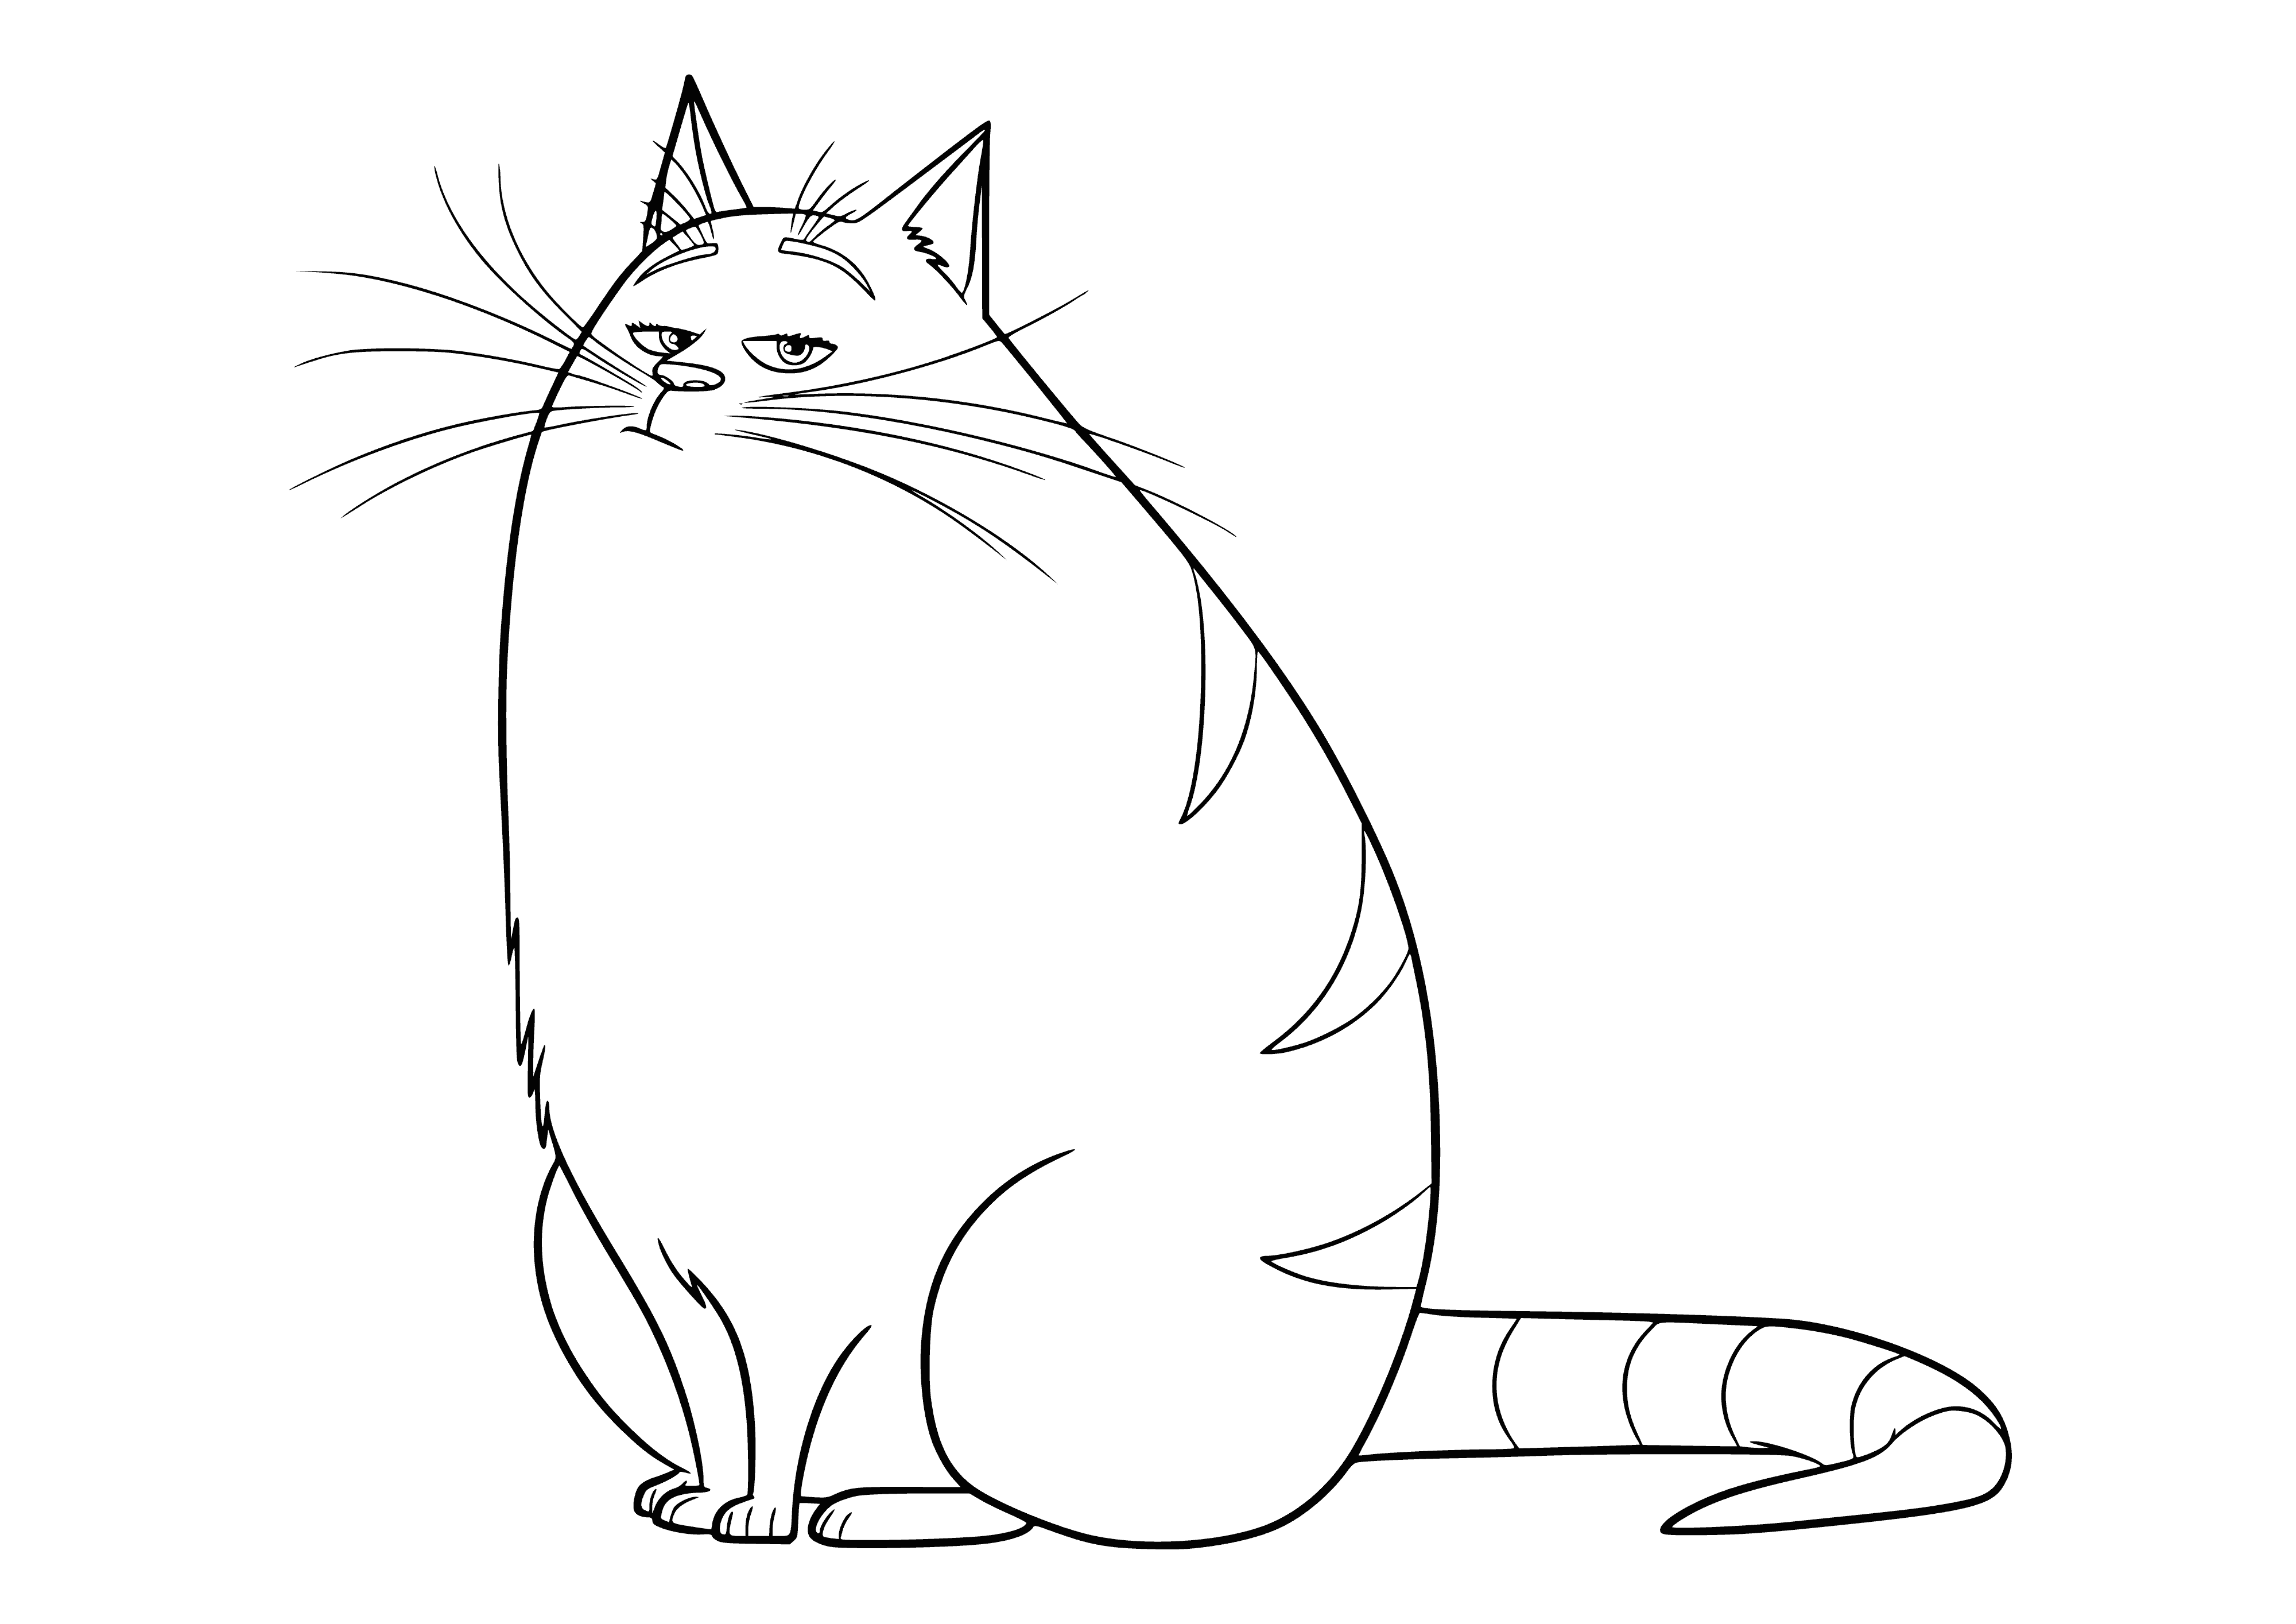 coloring page: Chloe the small, gray and white cat sitting in a green chair with her tail curled. She gazes aside from the camera.